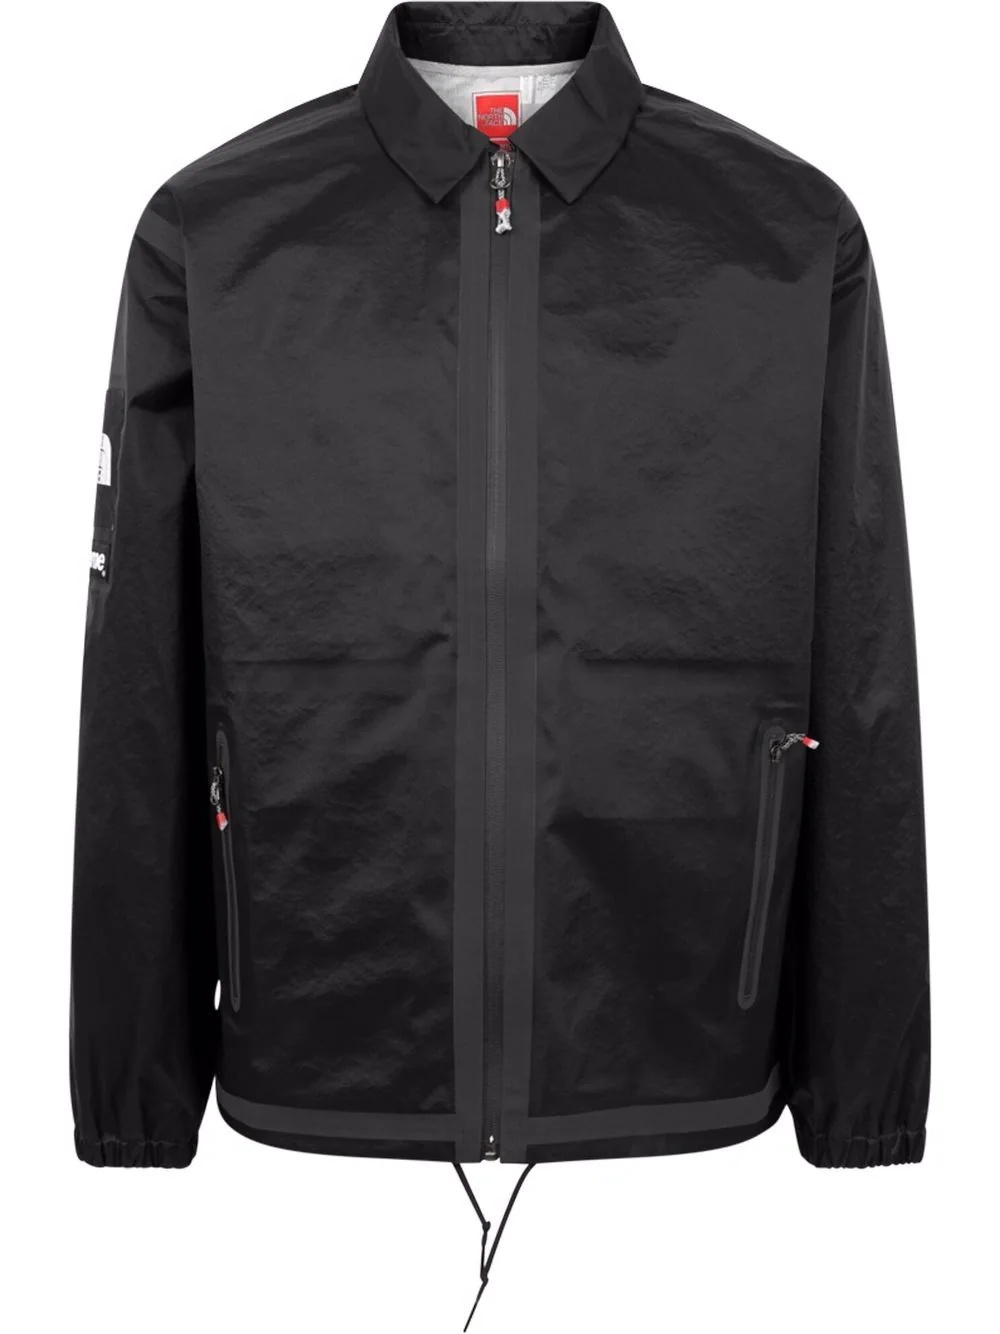 x The North Face Coach jacket "SS 21 Summit Series" - 1